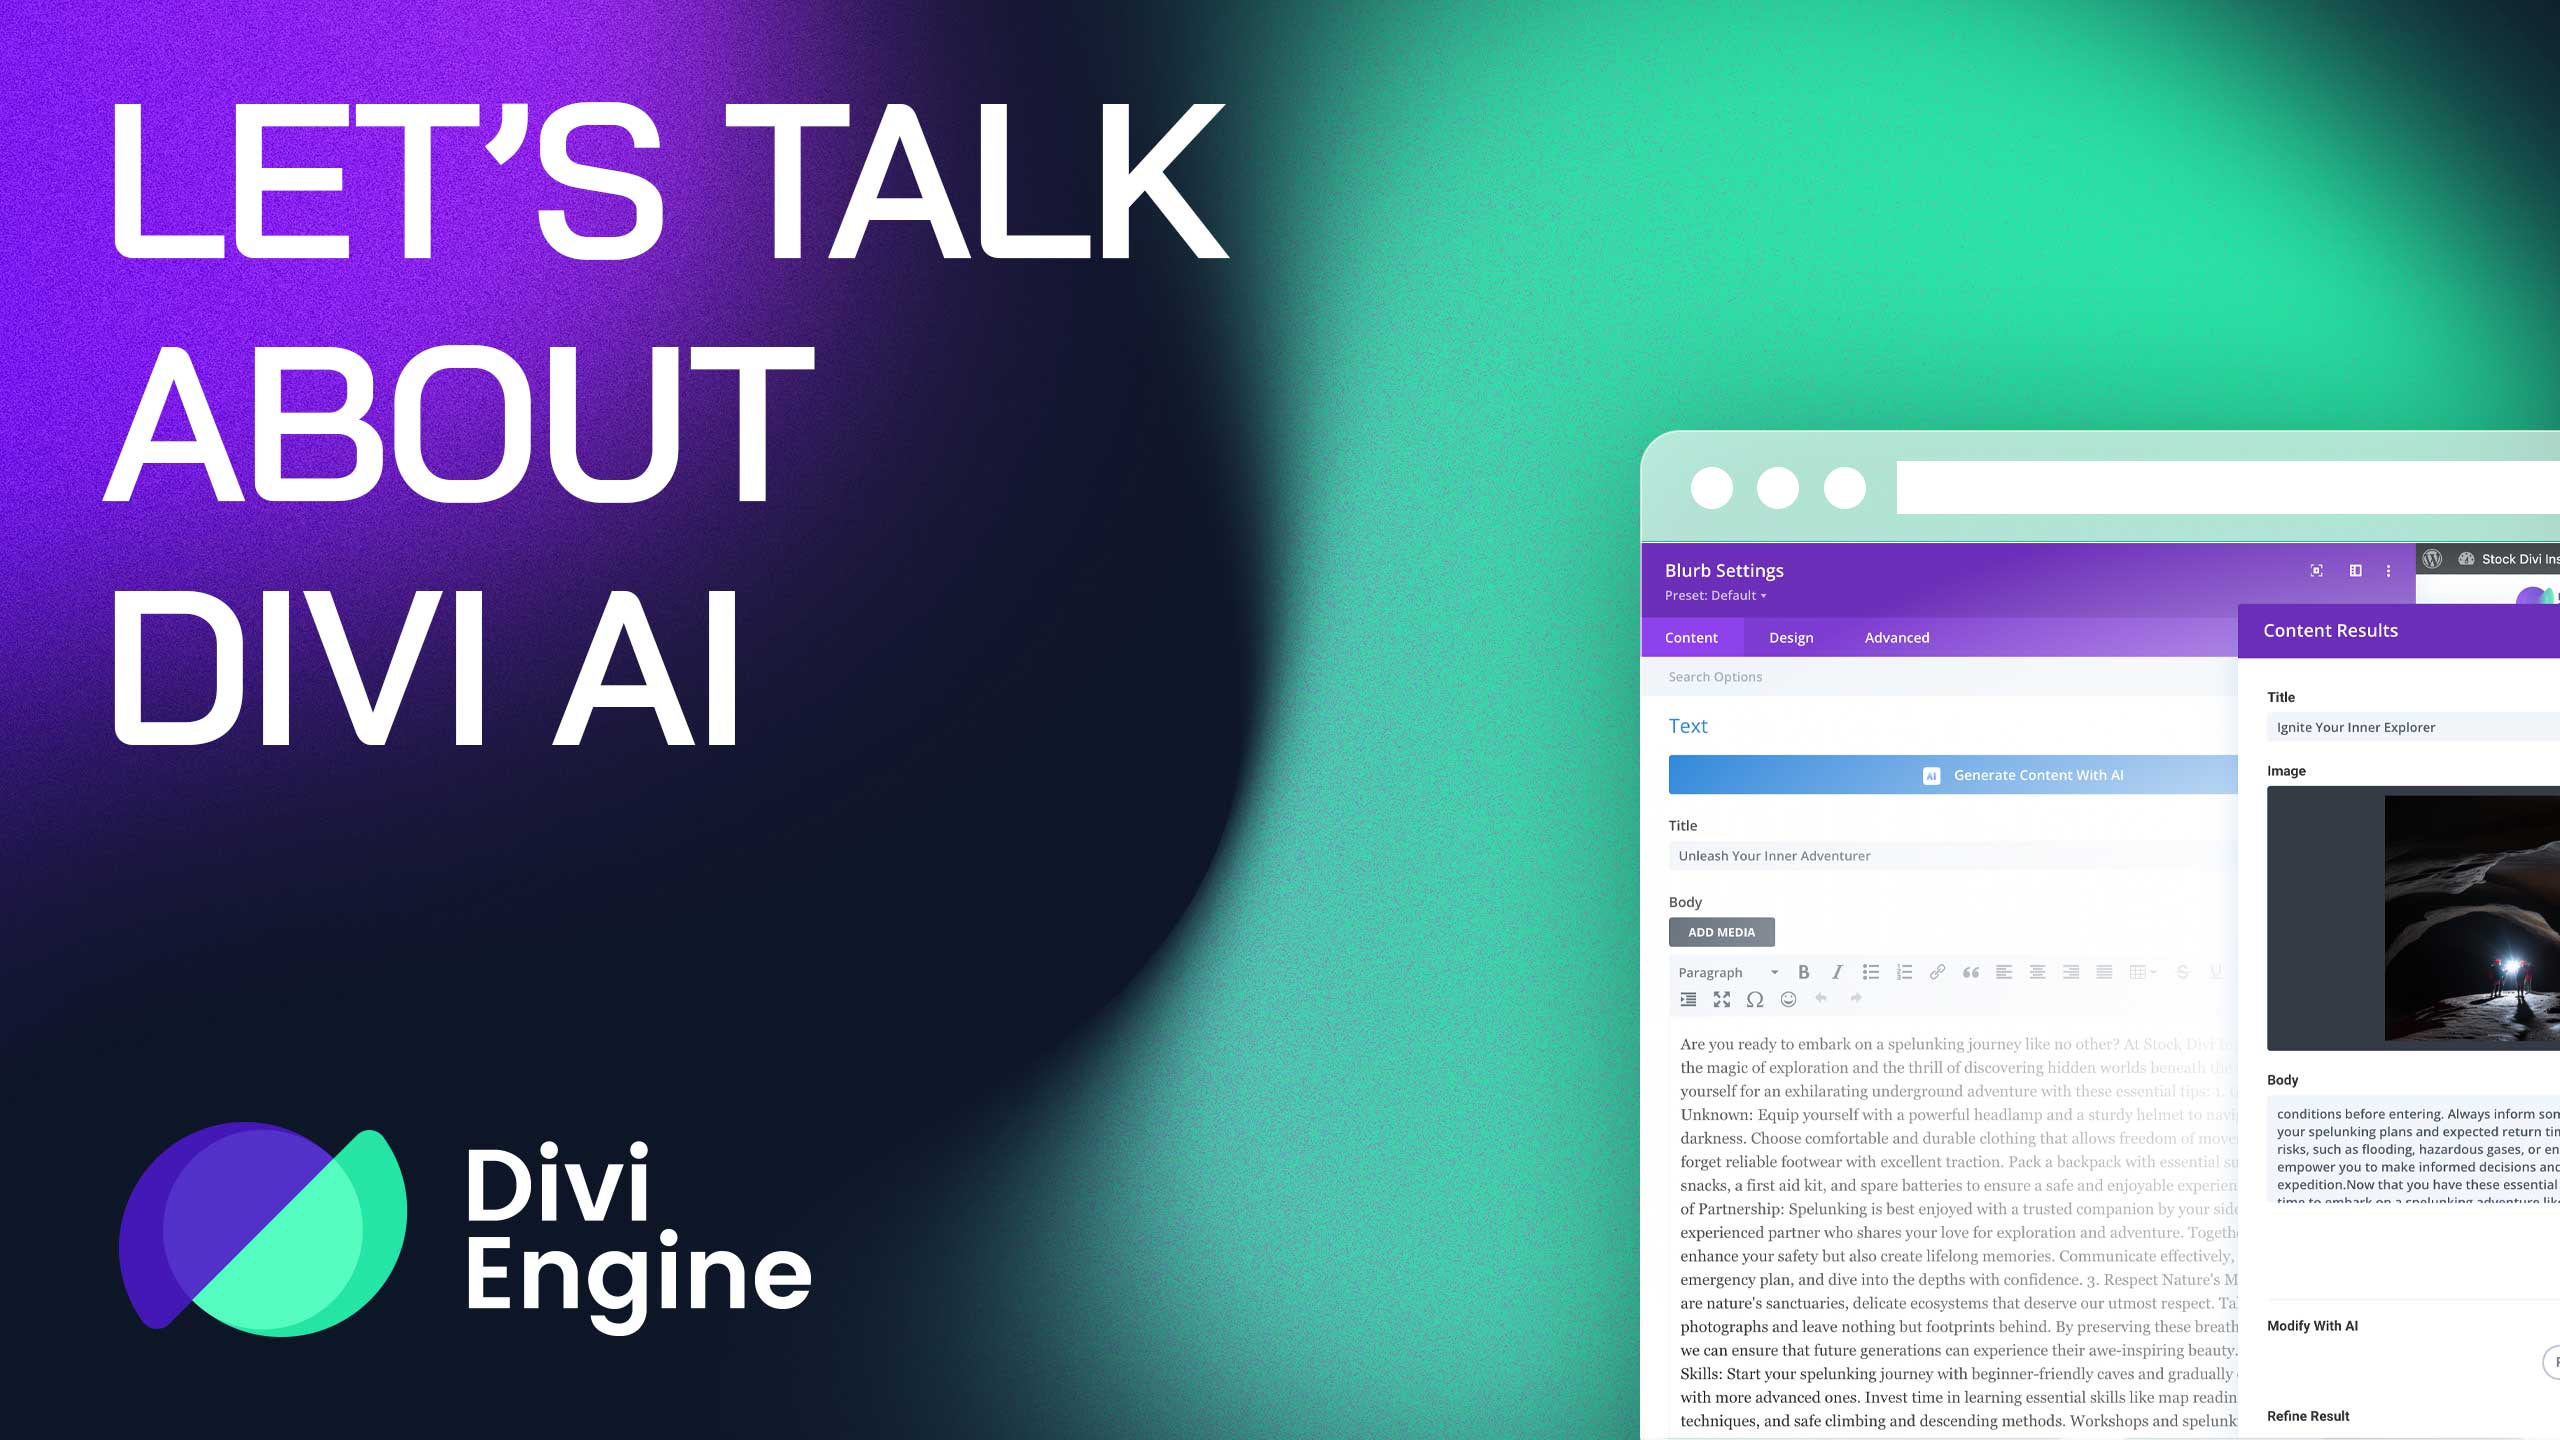 Divi AI is here and we want to talk about it